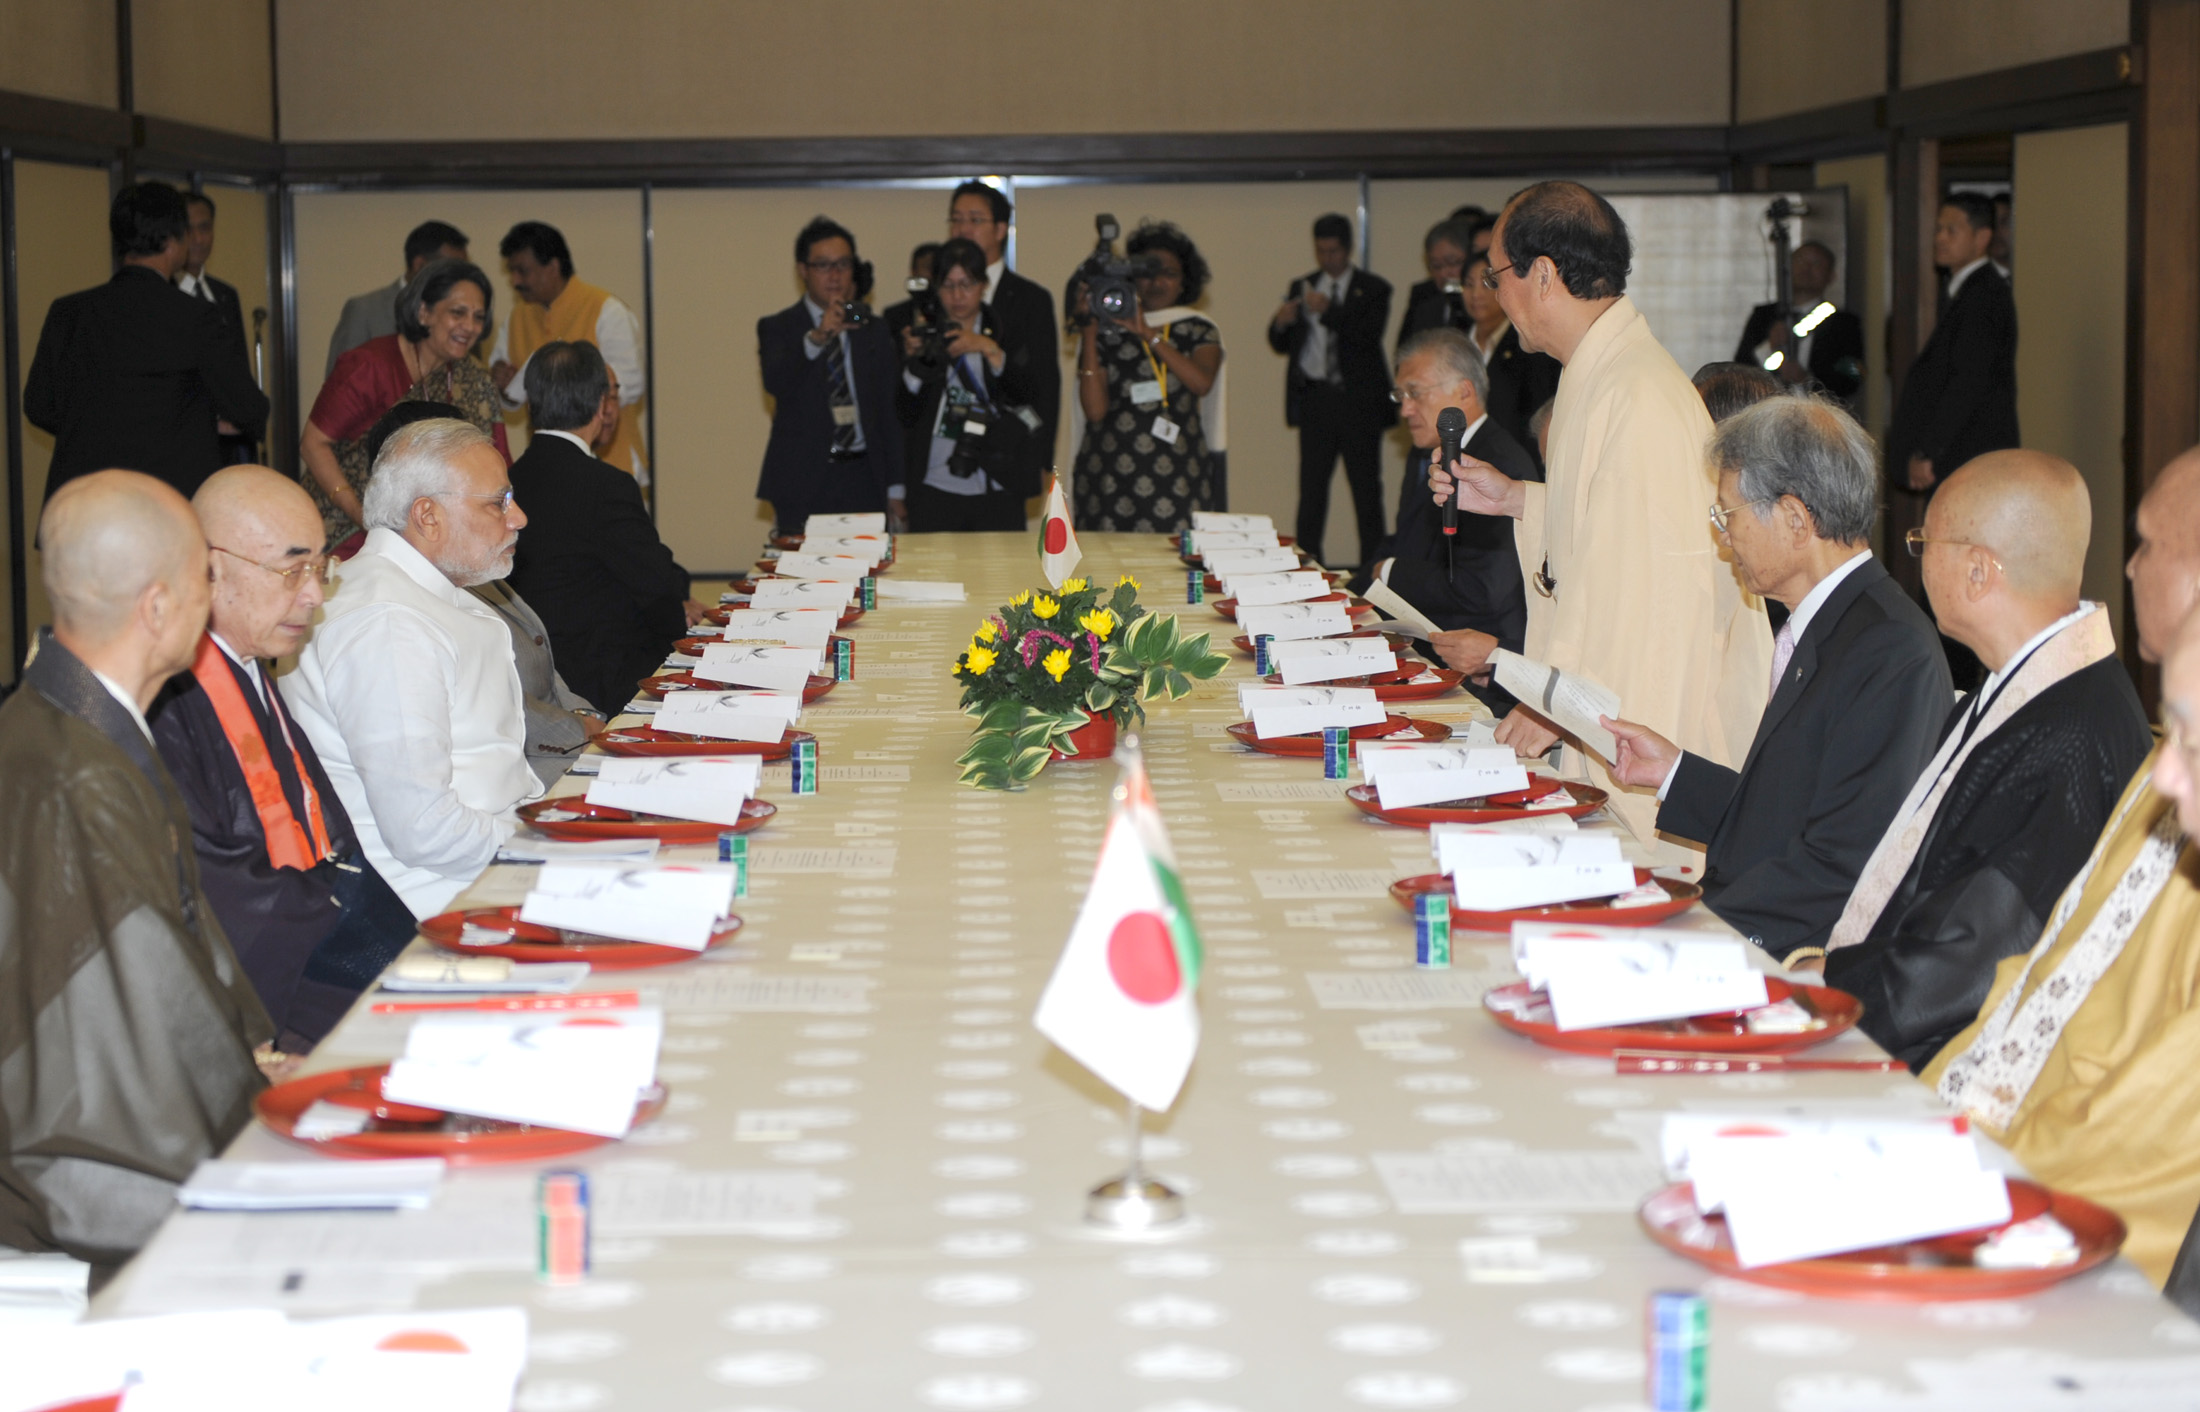 PM Narendra Modi during the luncheon meeting hosted by the Kyoto Buddhist Association